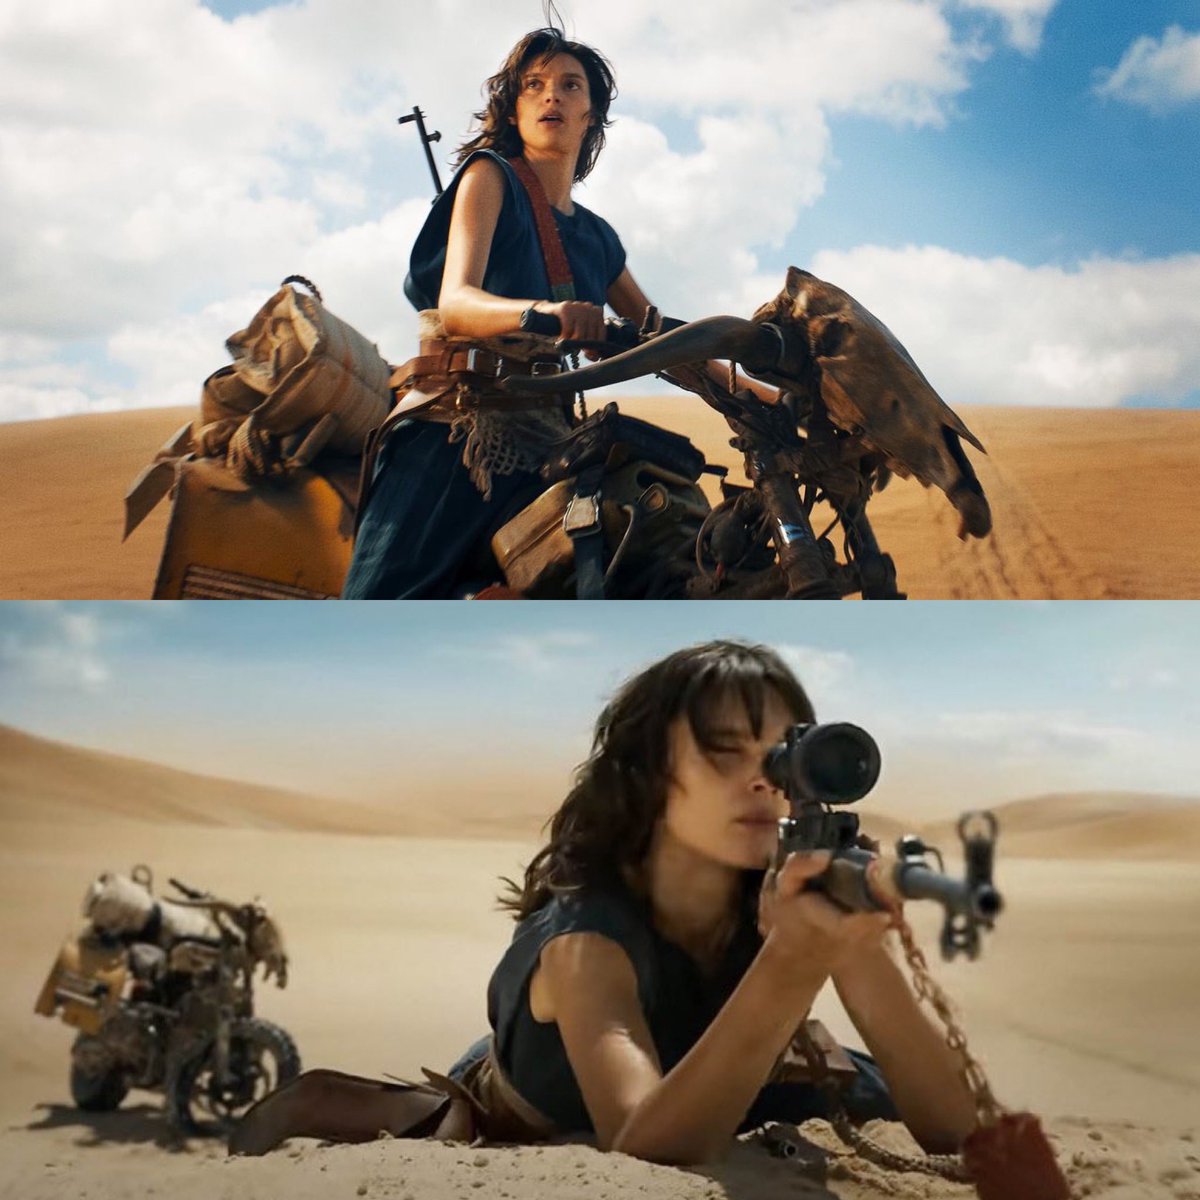 She (Charlee Fraser) *should* have multiple offers this morning arriving on her agent’s desk for badass actioners to headline.

#Furiosa//#MadMaxFuriosa